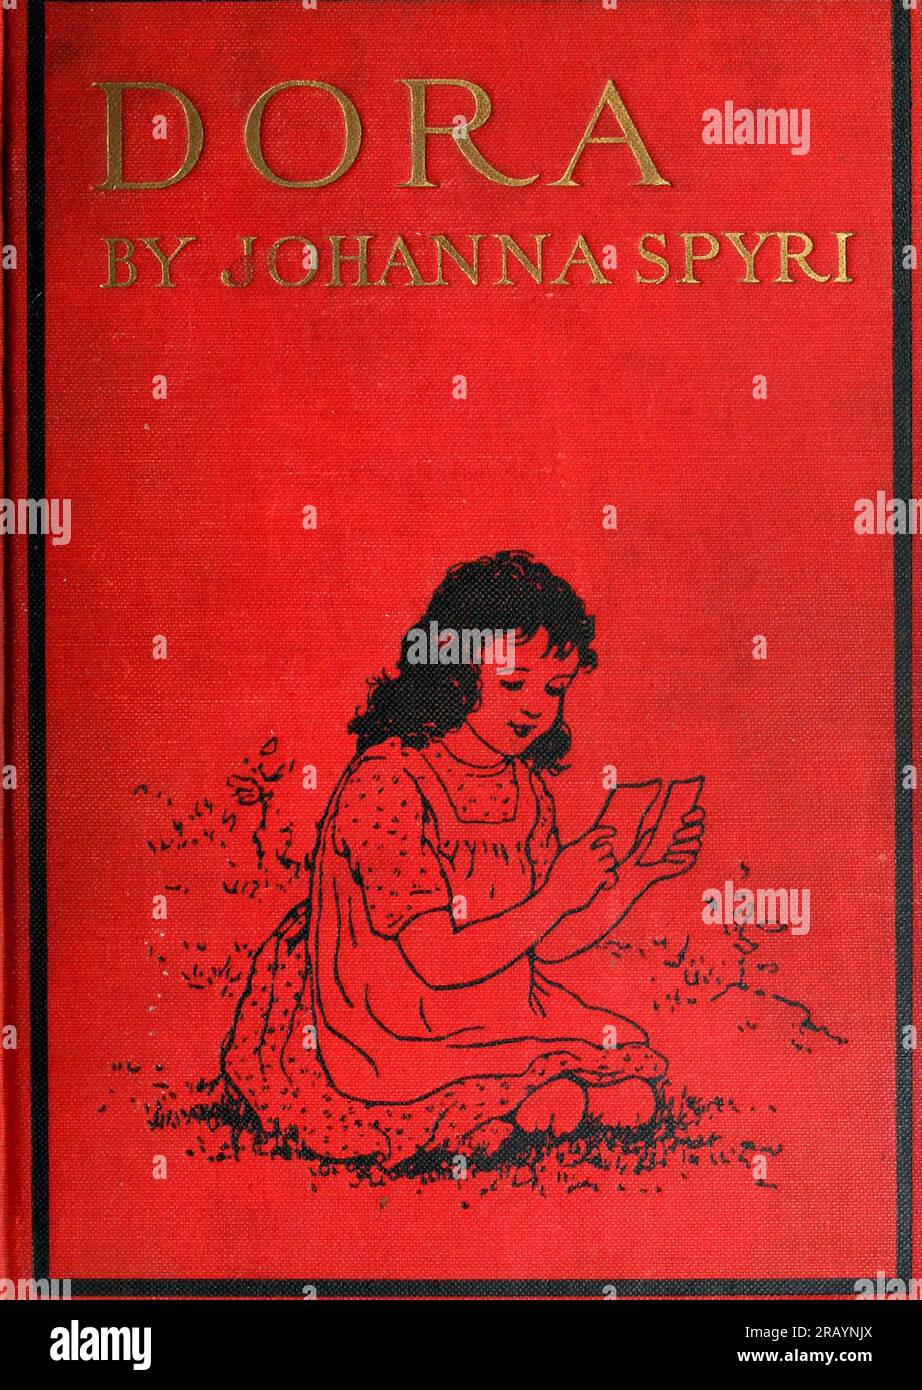 Front Cover in red and black illustrated by Maria L. Kirk from the book ' Dora ' by Spyri, Johanna, 1827-1901 Publication date 1924 Publisher Philadelphia & London, J.B. Lippincott Johanna Louise Spyri (12 June 1827 – 7 July 1901) was a Swiss author of novels, notably children's stories. She wrote the popular book Heidi. Born in Hirzel, a rural area in the canton of Zürich, as a child she spent several summers near Chur in Graubünden, the setting she later would use in her novels. Stock Photo